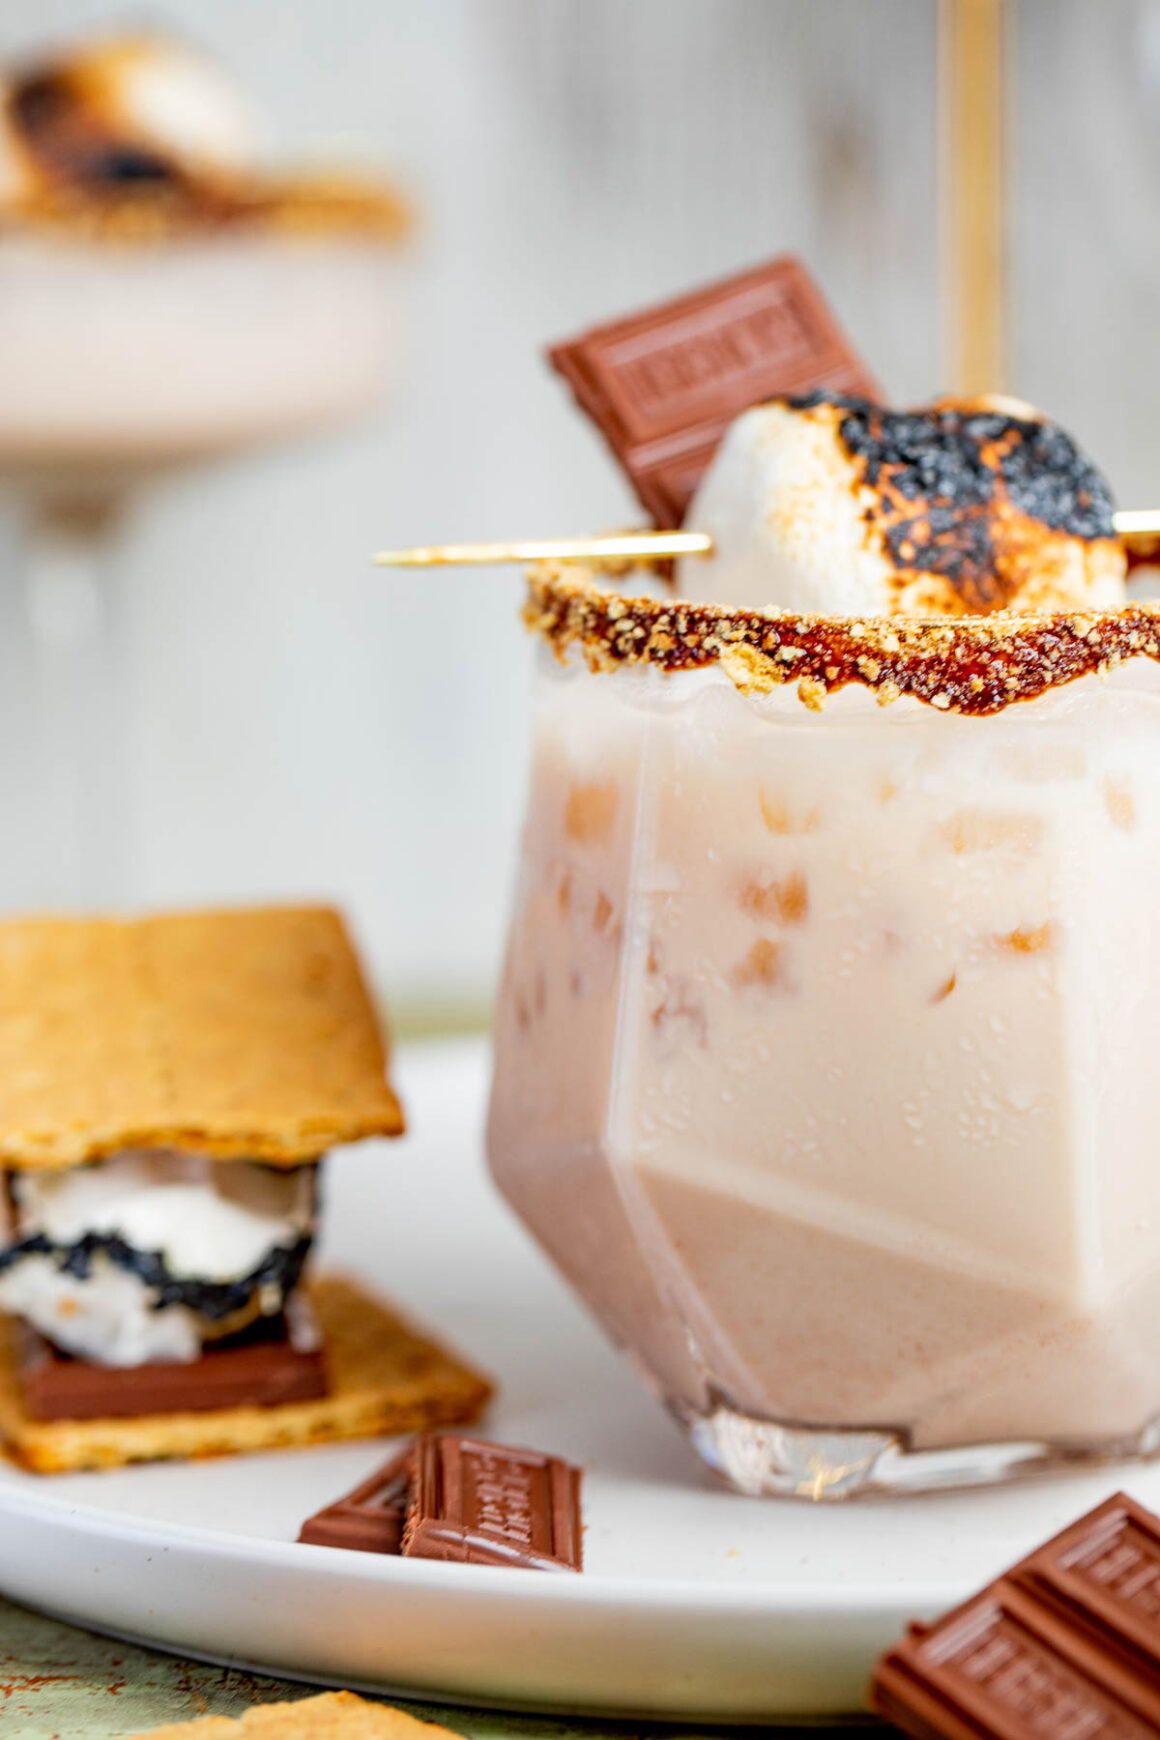 The S'mores Martini cocktail is a versatile drink that can be enjoyed on a number of occasions.